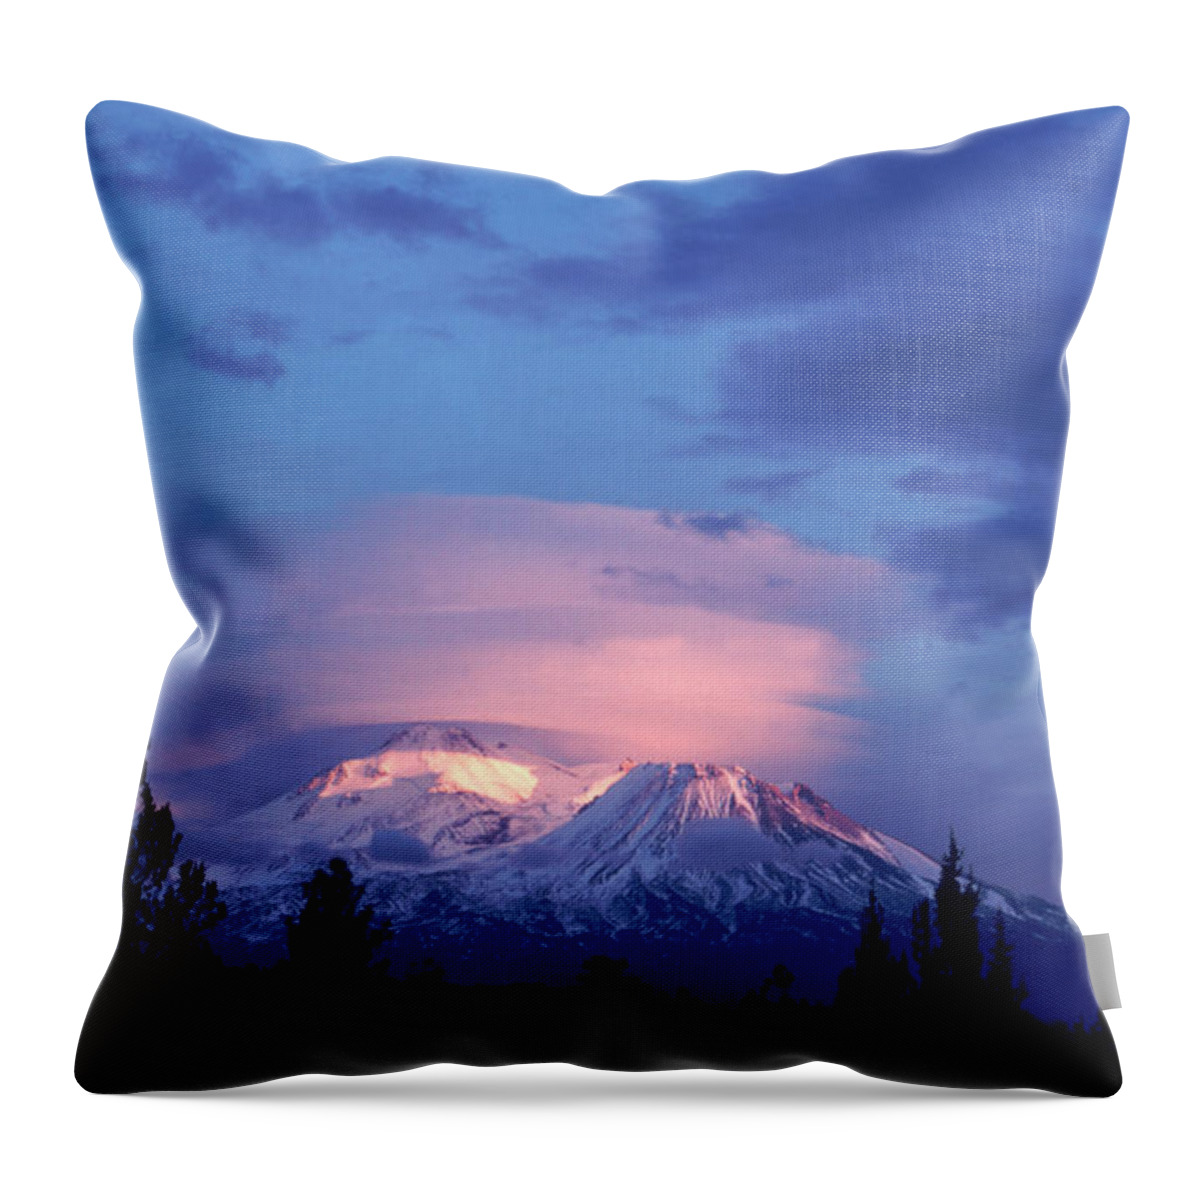 Scenics Throw Pillow featuring the photograph Mt Shasta At Dusk by Mark Gibson